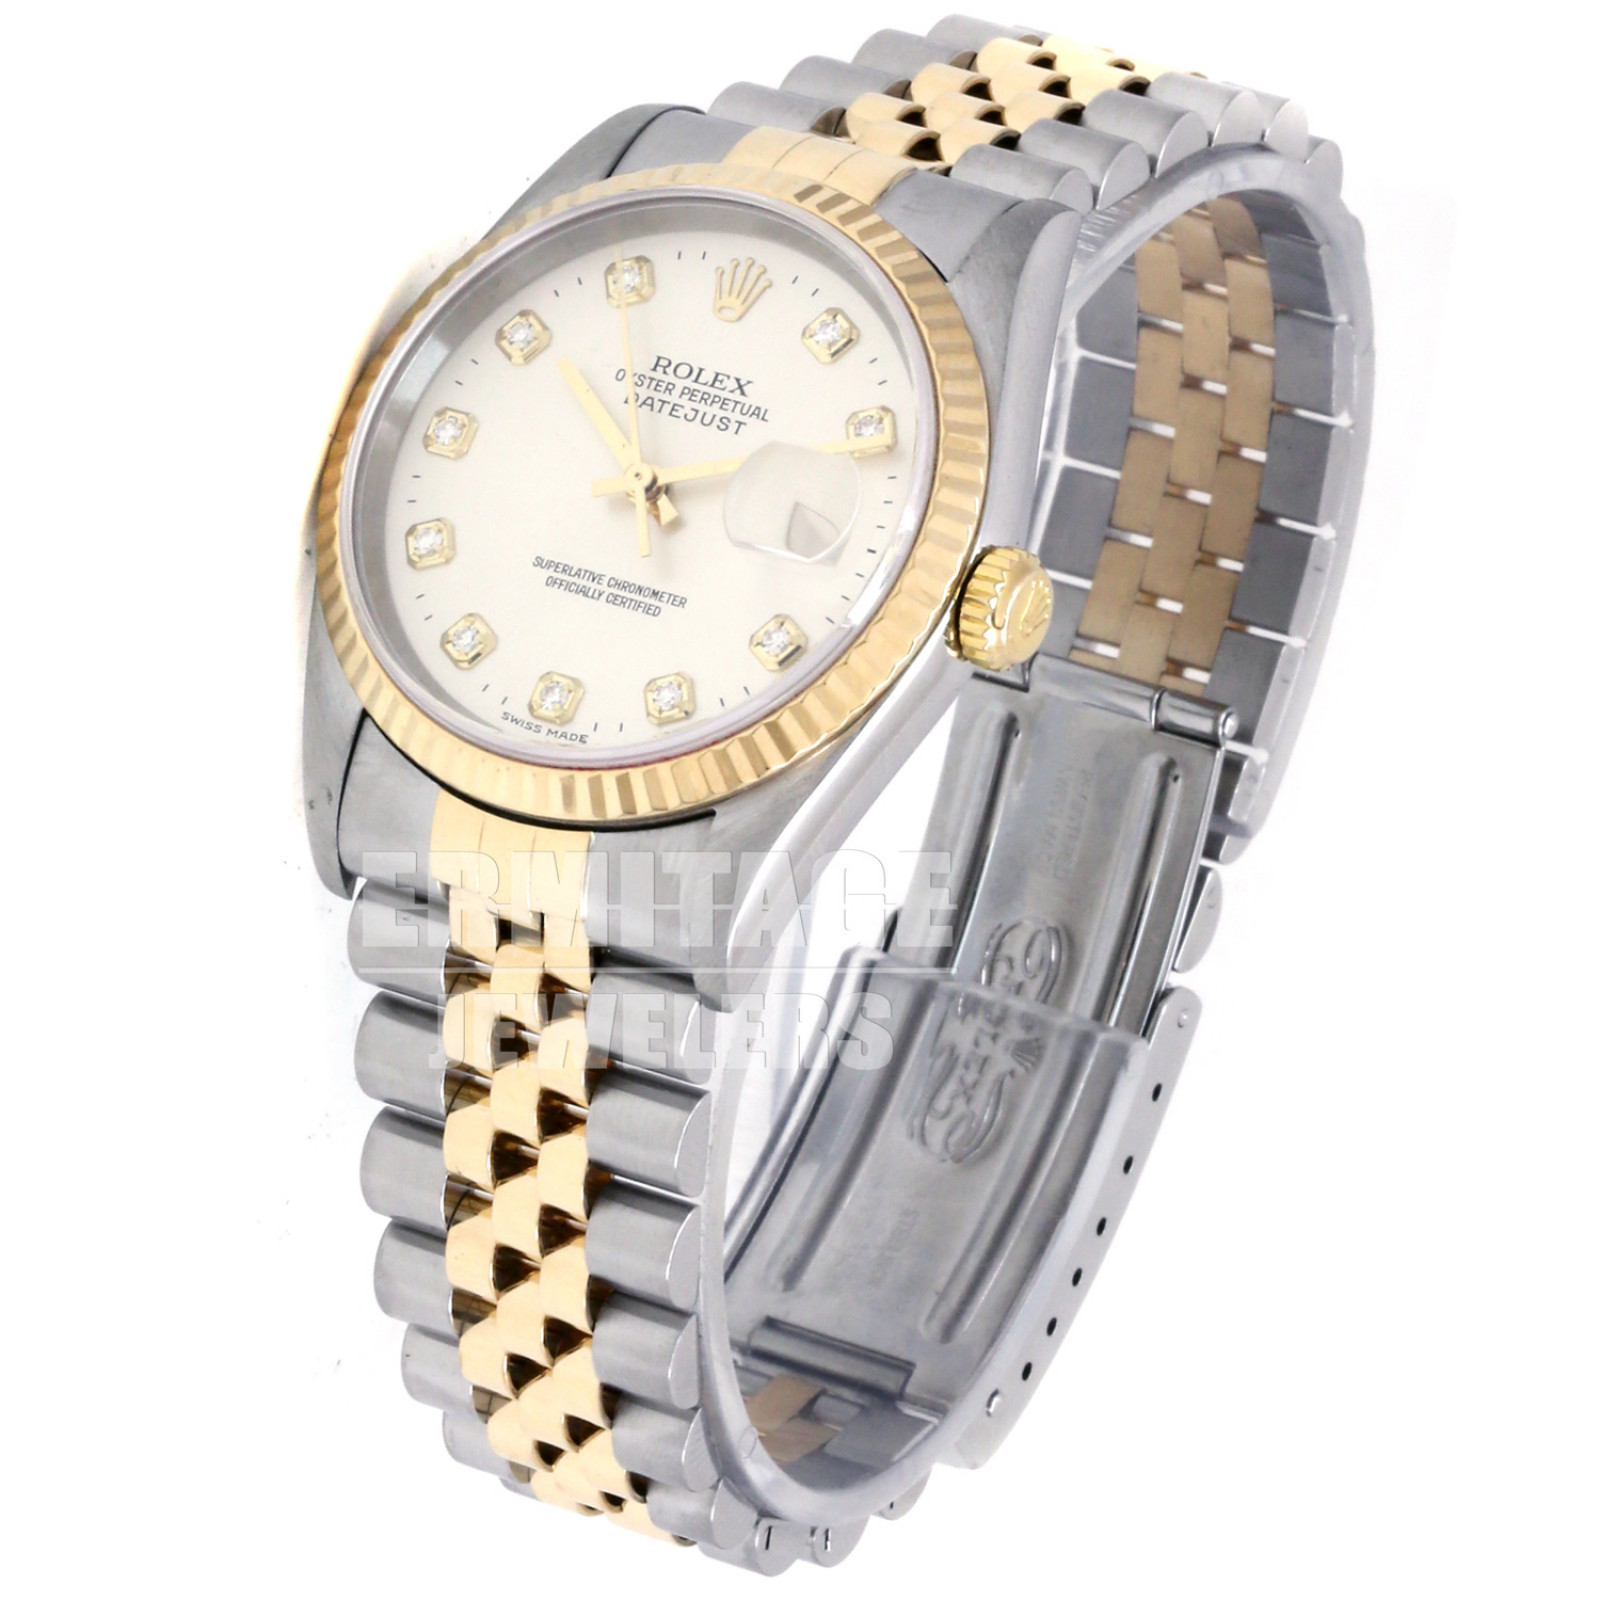 Diamond Rolex Datejust 16233 with Steel Dial